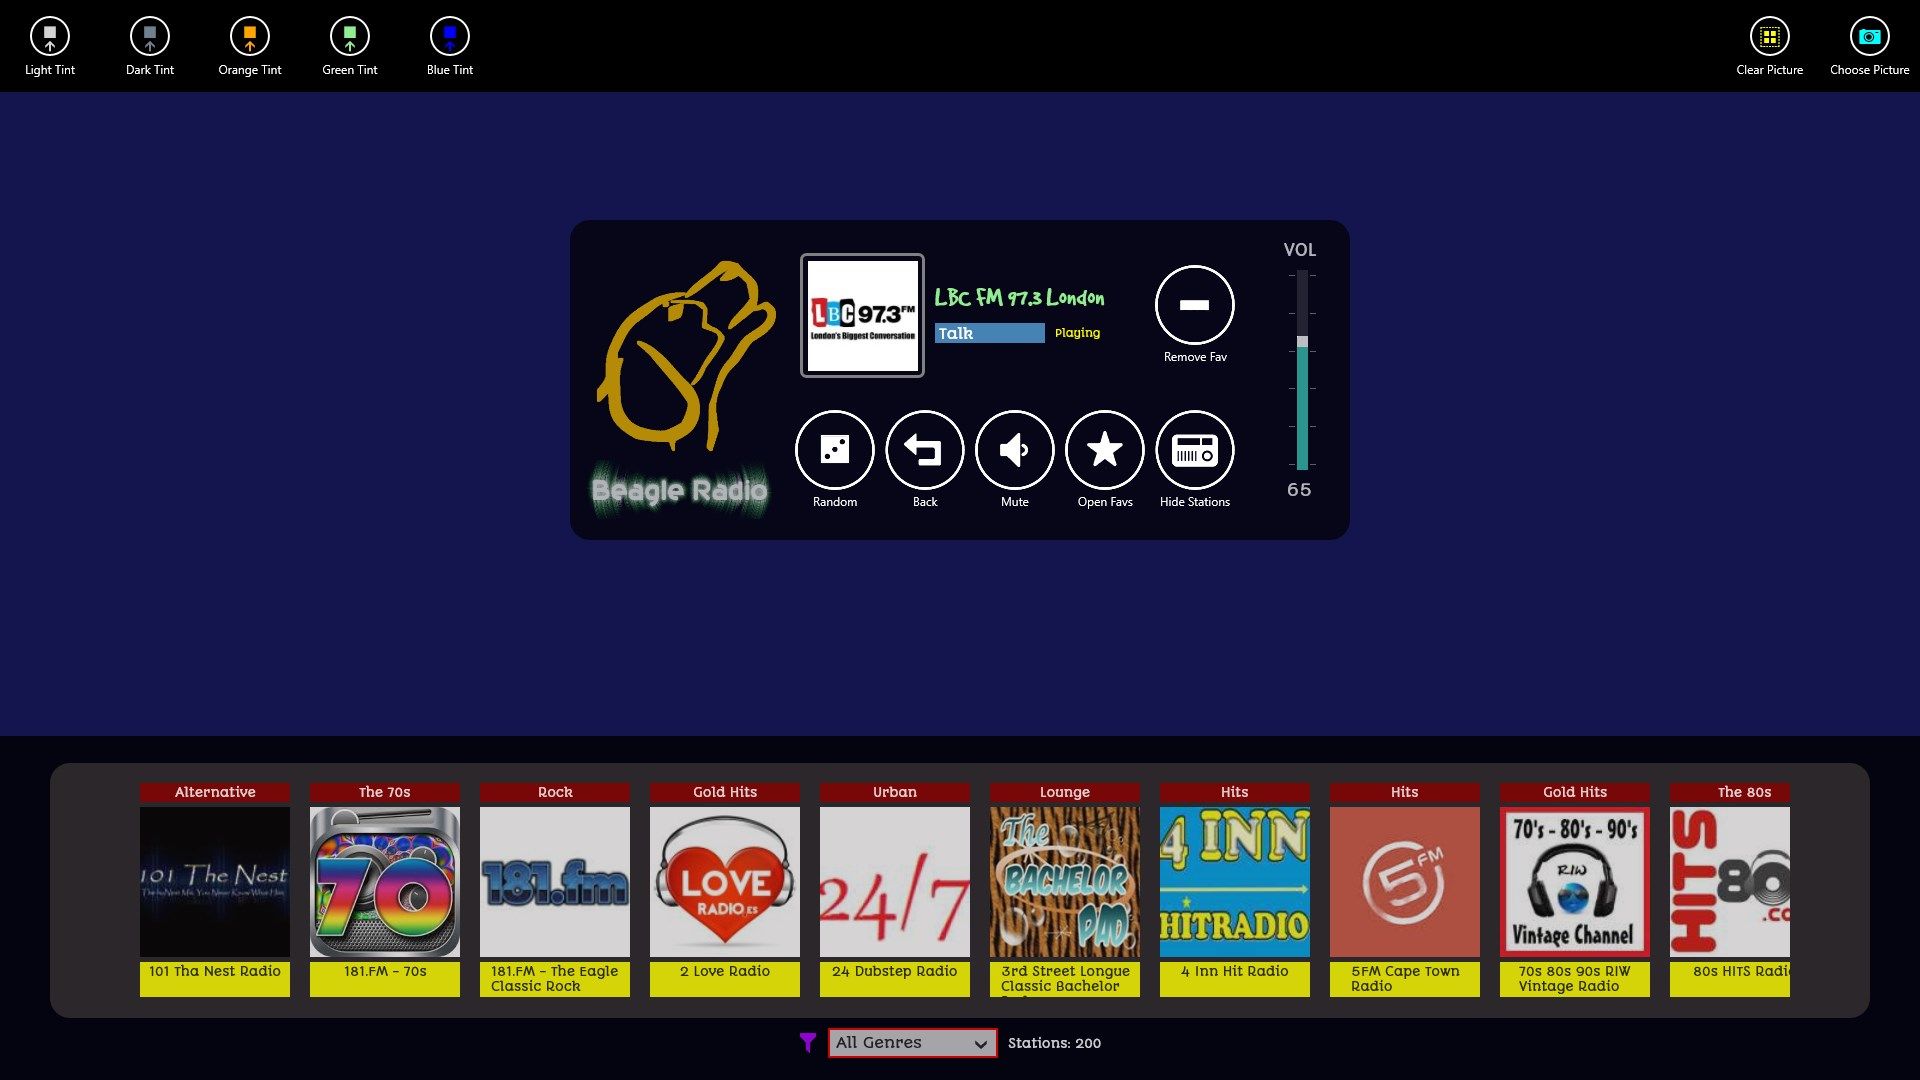 Choose your station from scrolling menu or random choice button, also change your color scheme to suit your mood